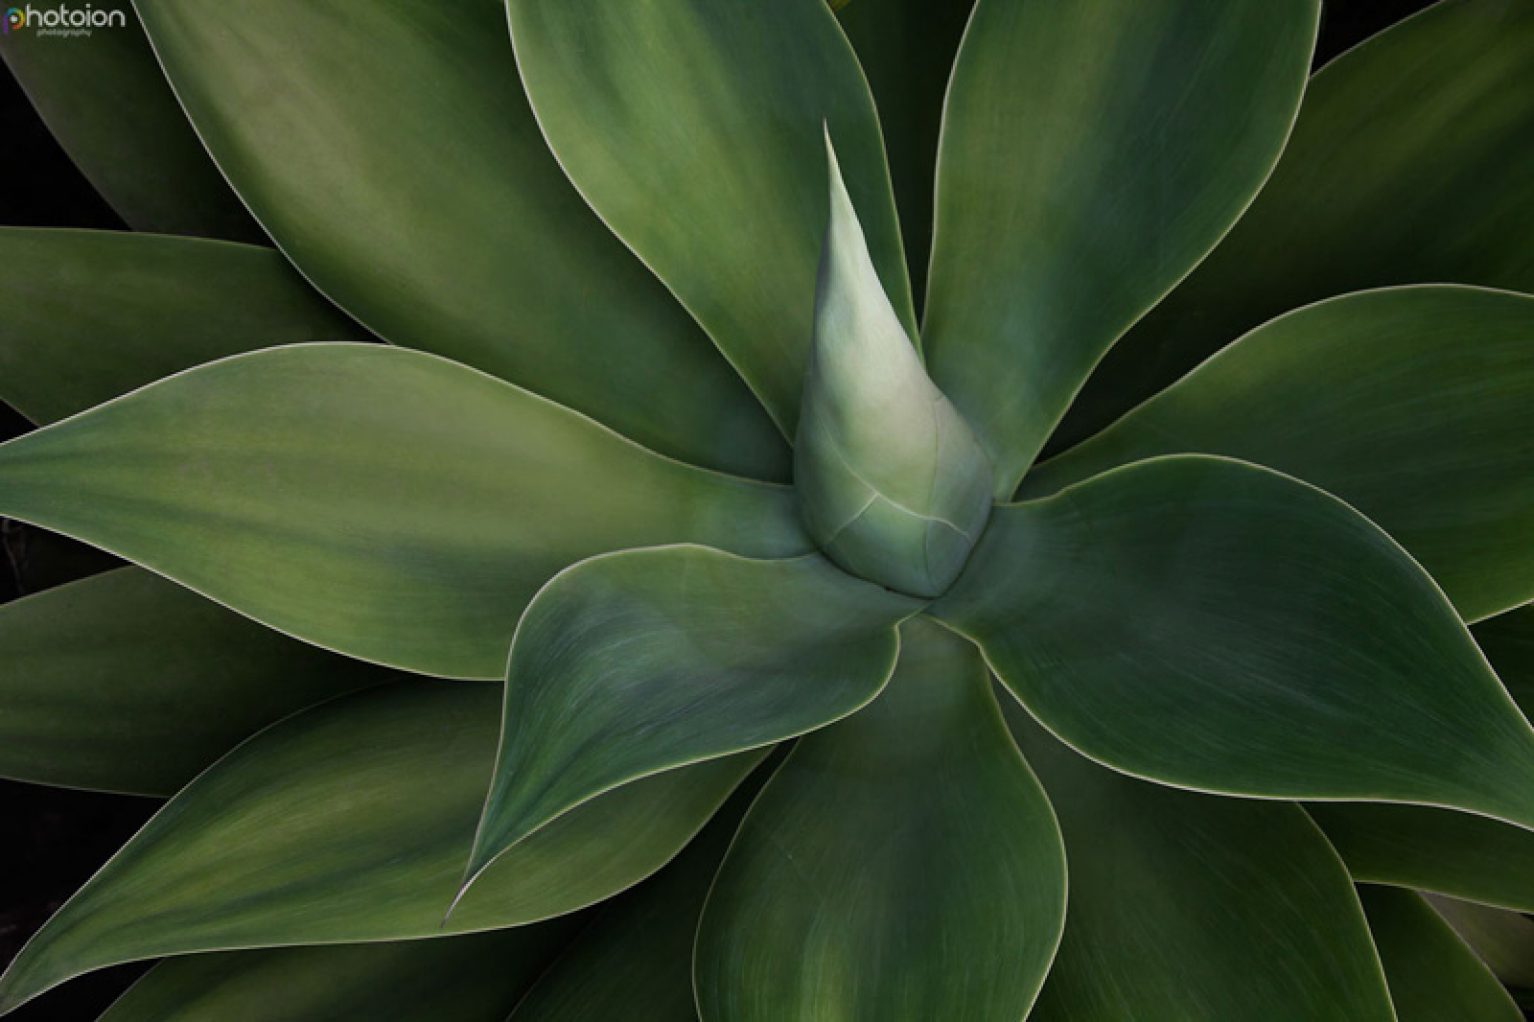 Close up full frame of an Agave Attenuata plant